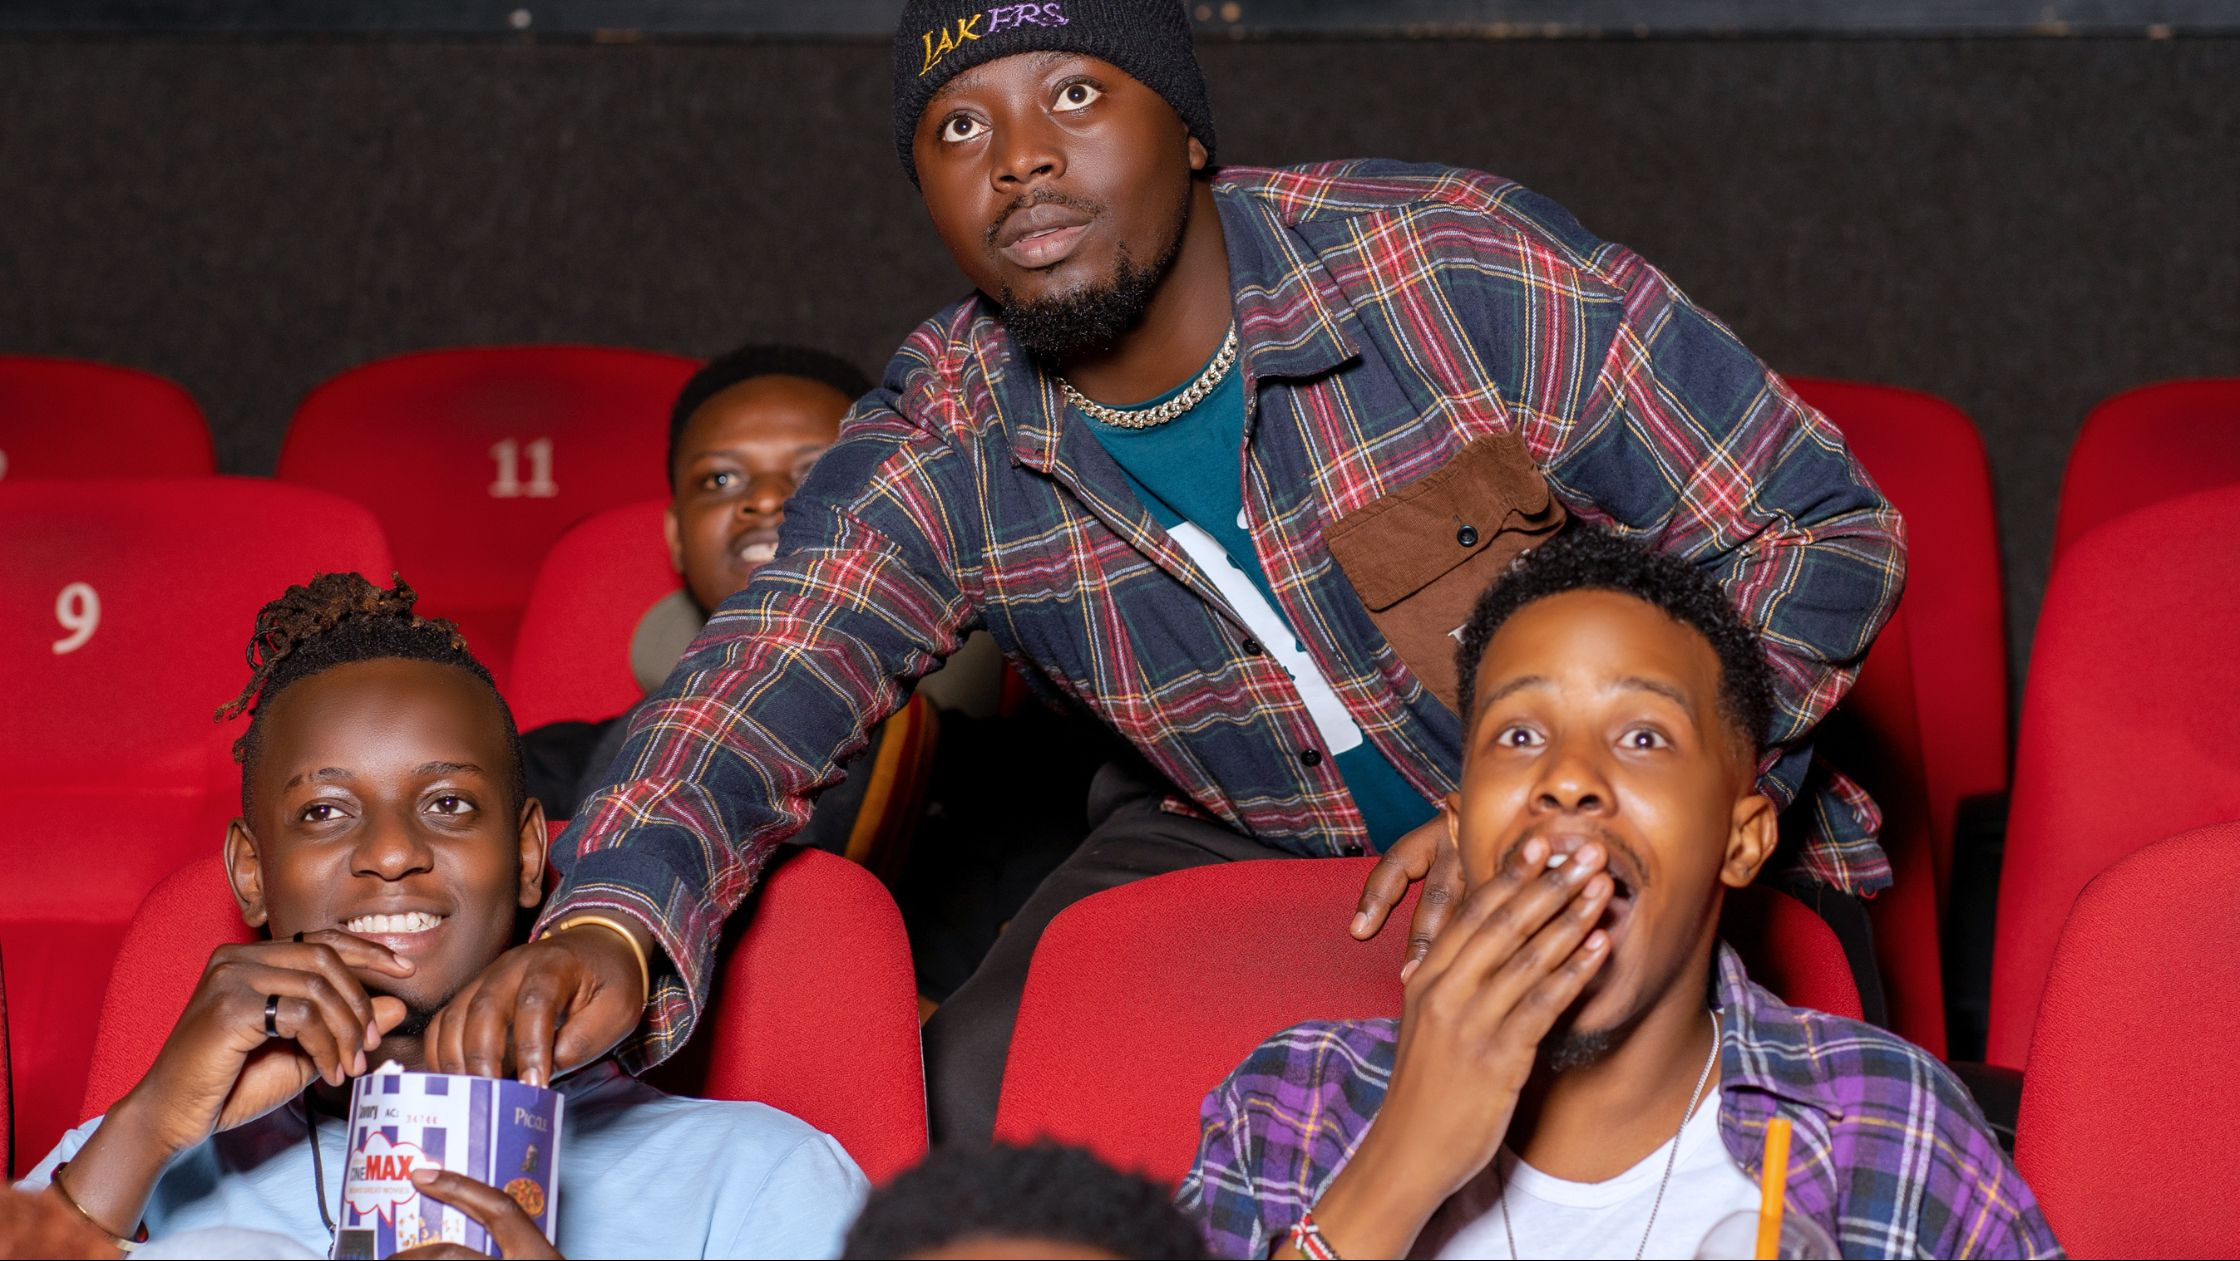 What Uganda's film industry can learn from the music industry to grow impact and success.